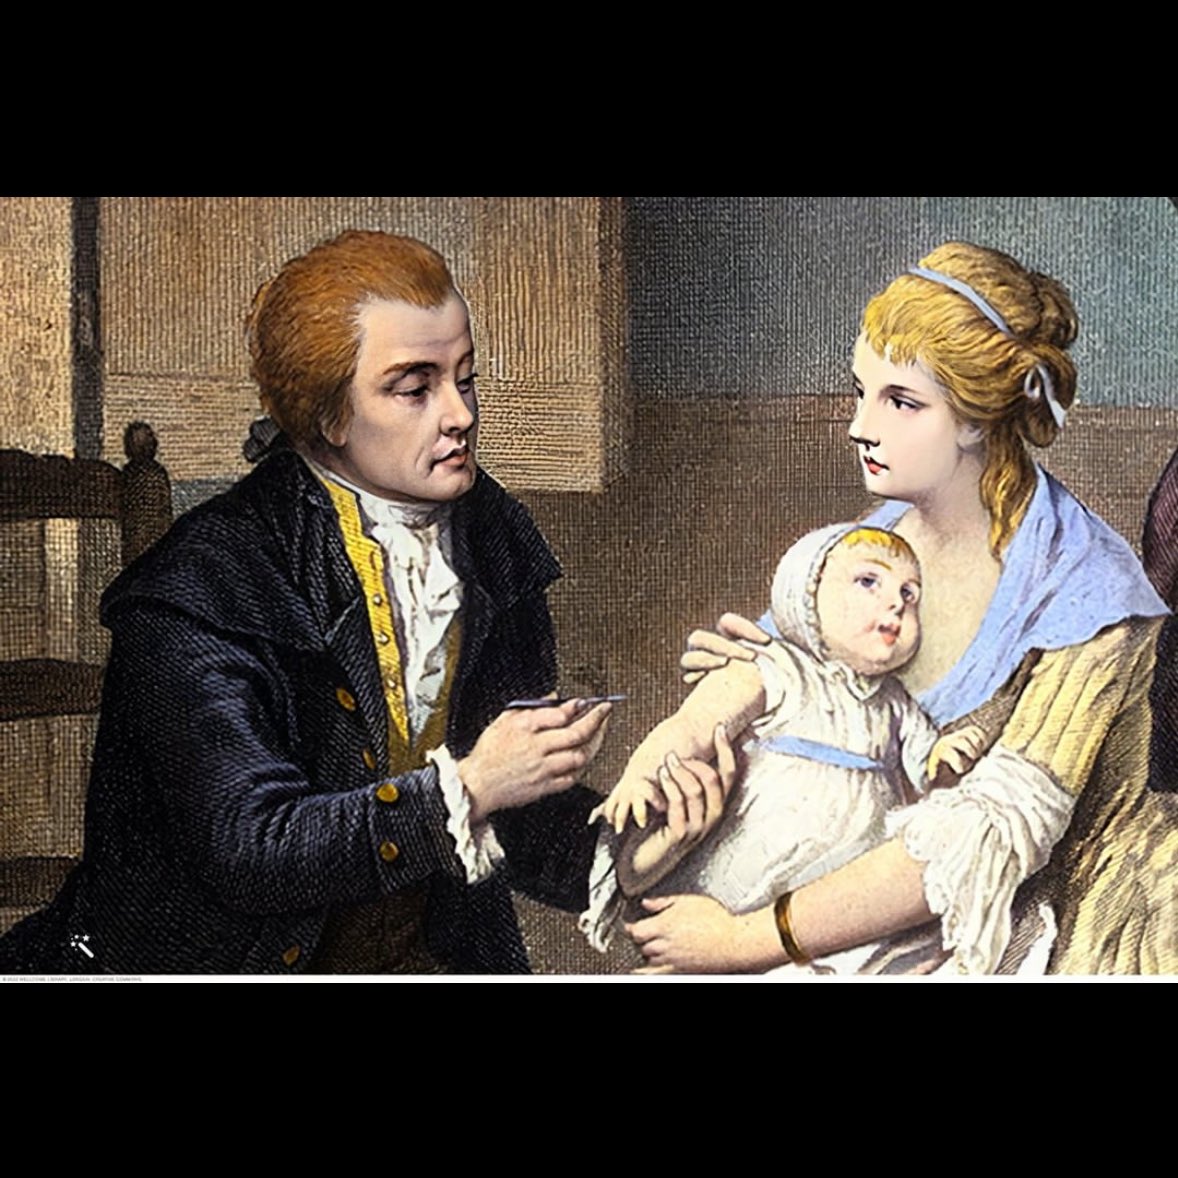 SMALLPOX VACCINE DISCOVERED ANNIVERSARY - 14 May 1796. Edward Jenner, a physician in rural England, developed a vaccination for smallpox, Within 18 months, 12,000 people in England had been vaccinated and the number of smallpox deaths dropped by two-thirds.